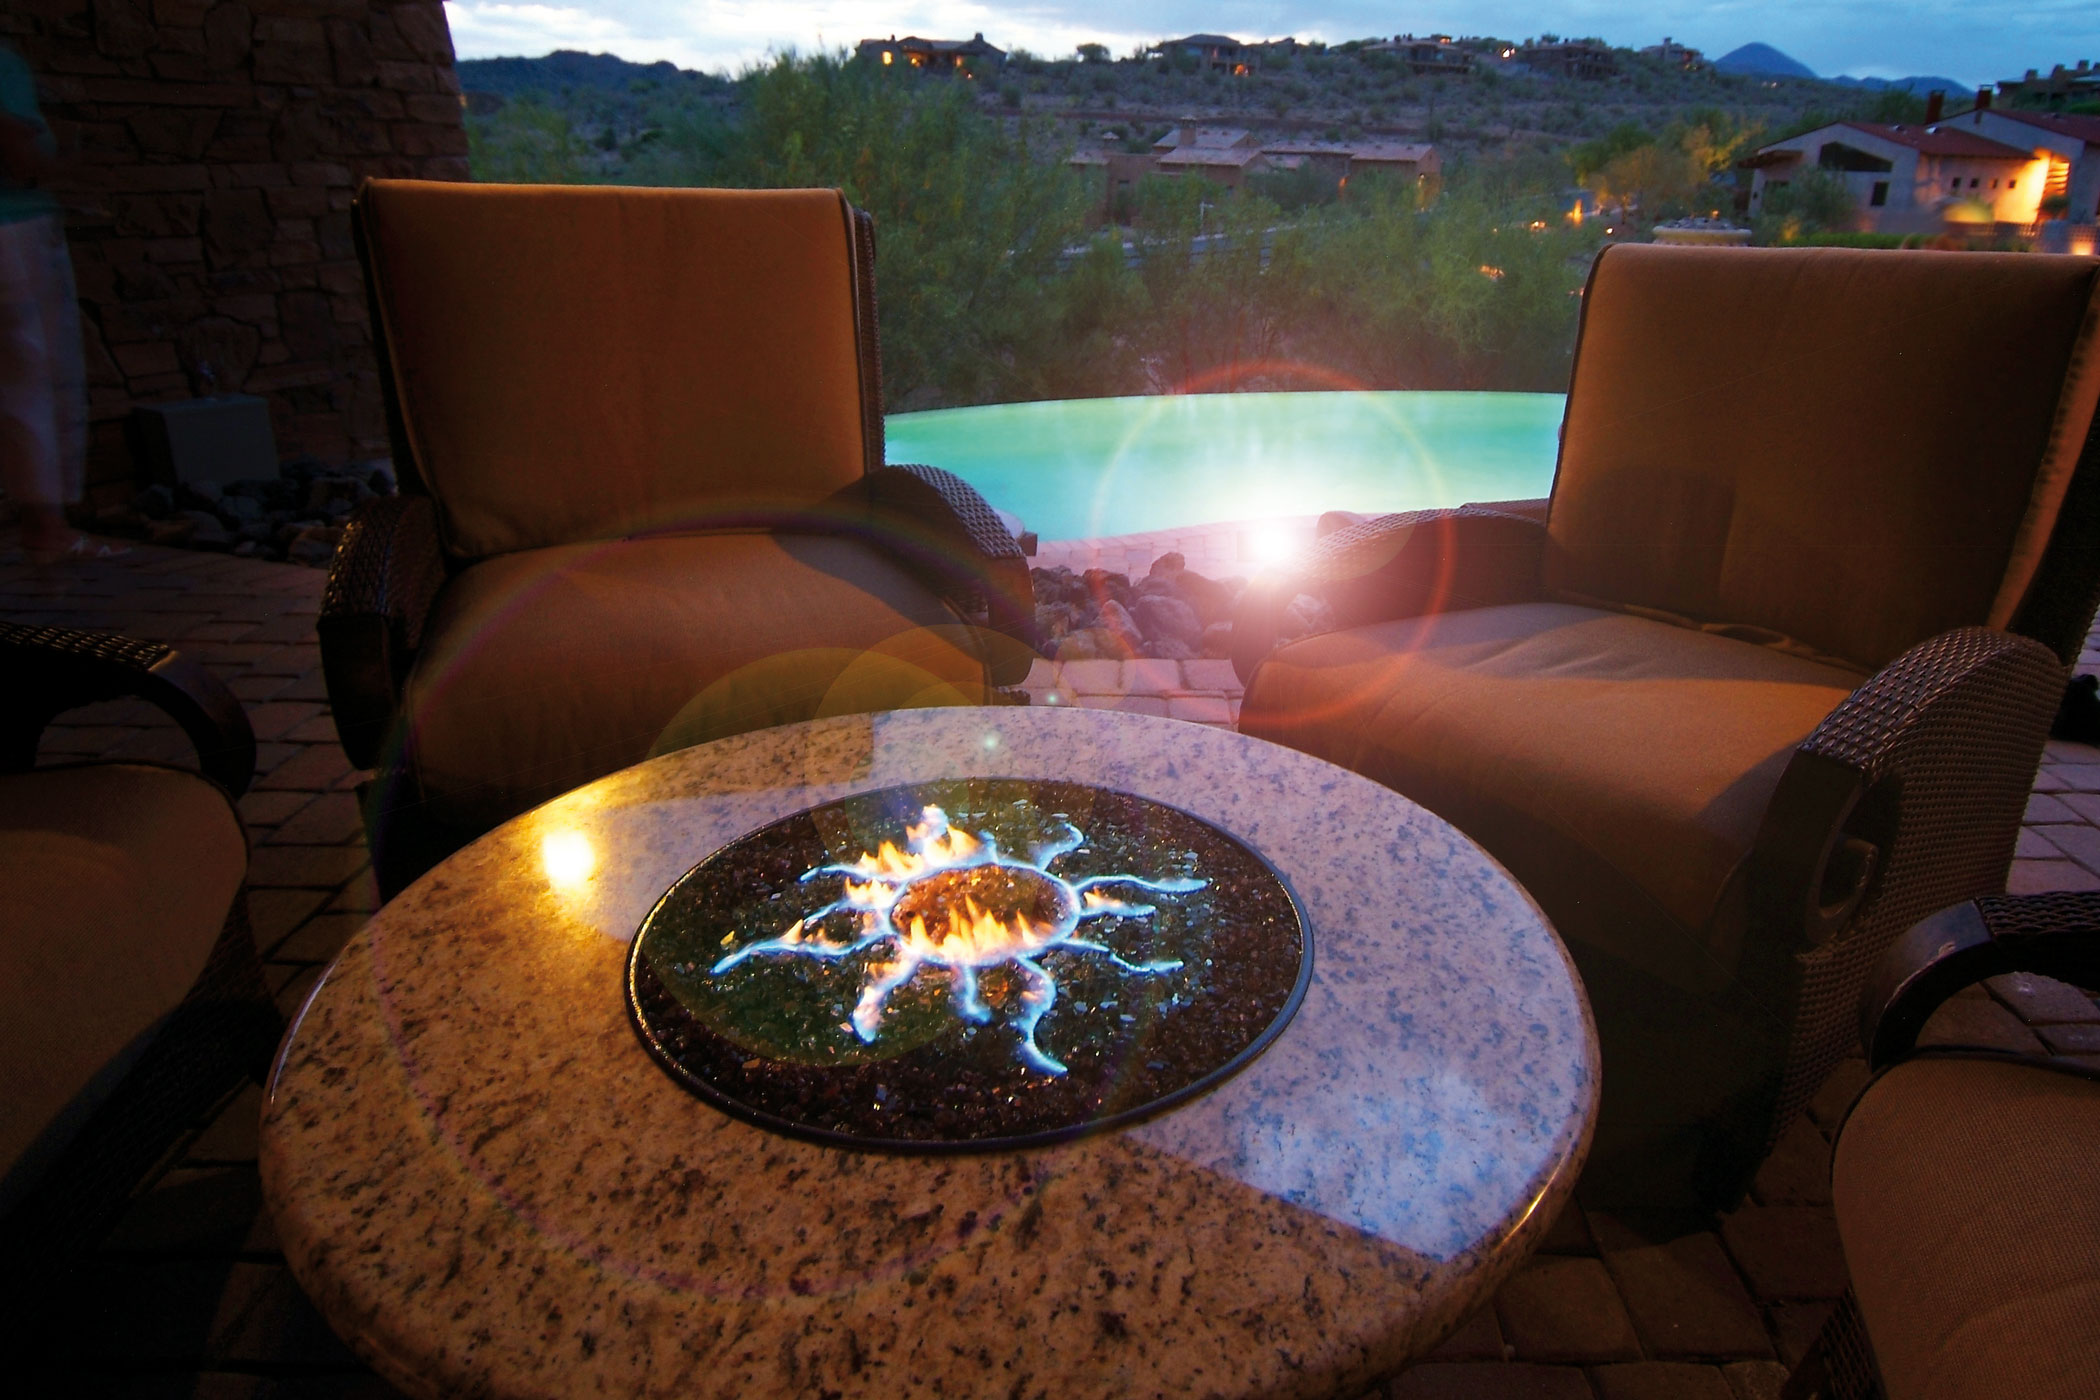 Manufacturer Of The Oriflamme Fire Tables, Oriflamme Fire Pit Reviews